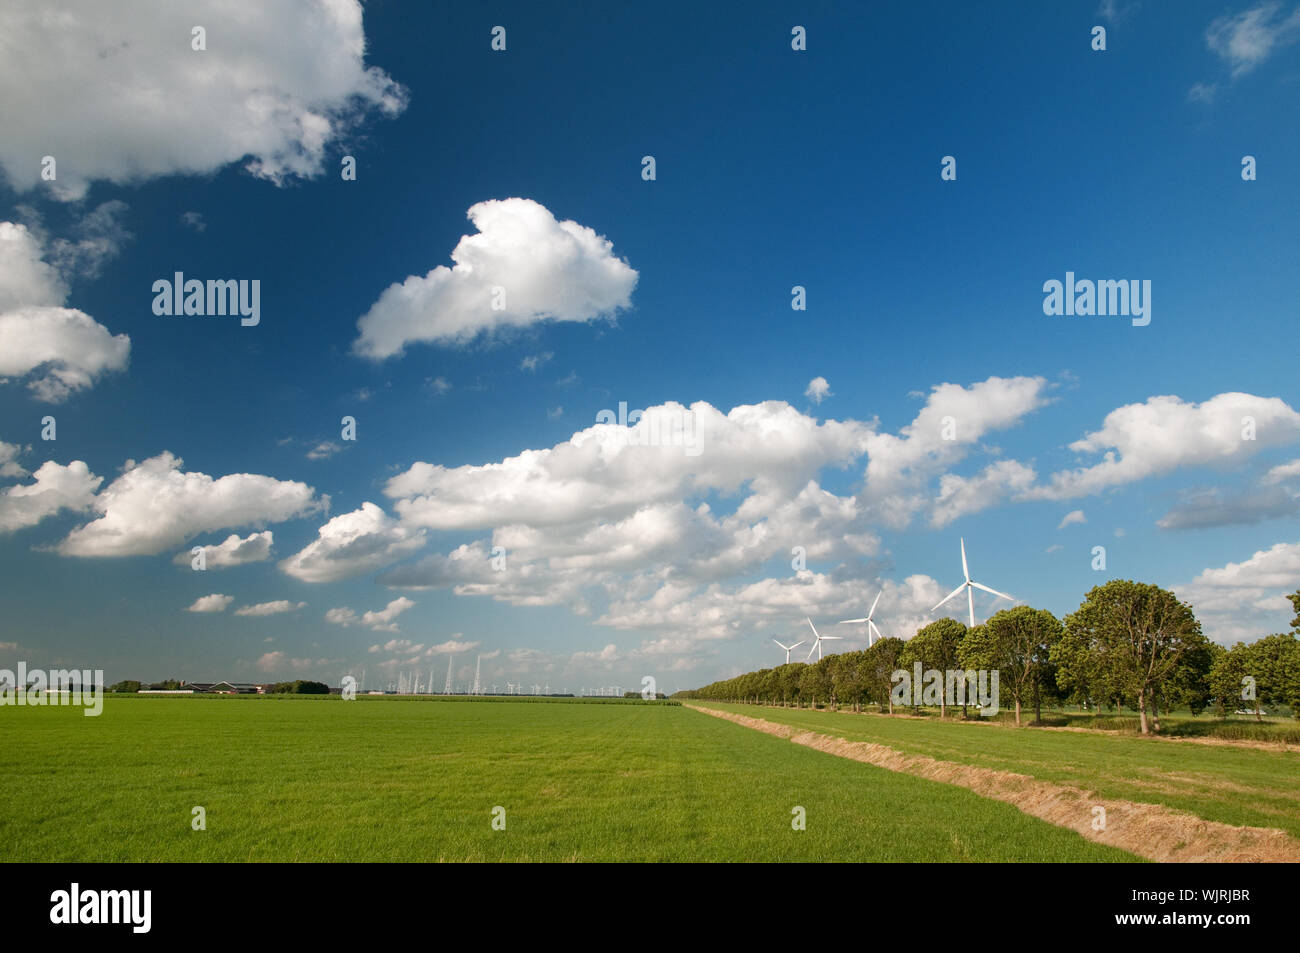 Many wind mills power turbines in landscape with cloudy sky Stock Photo